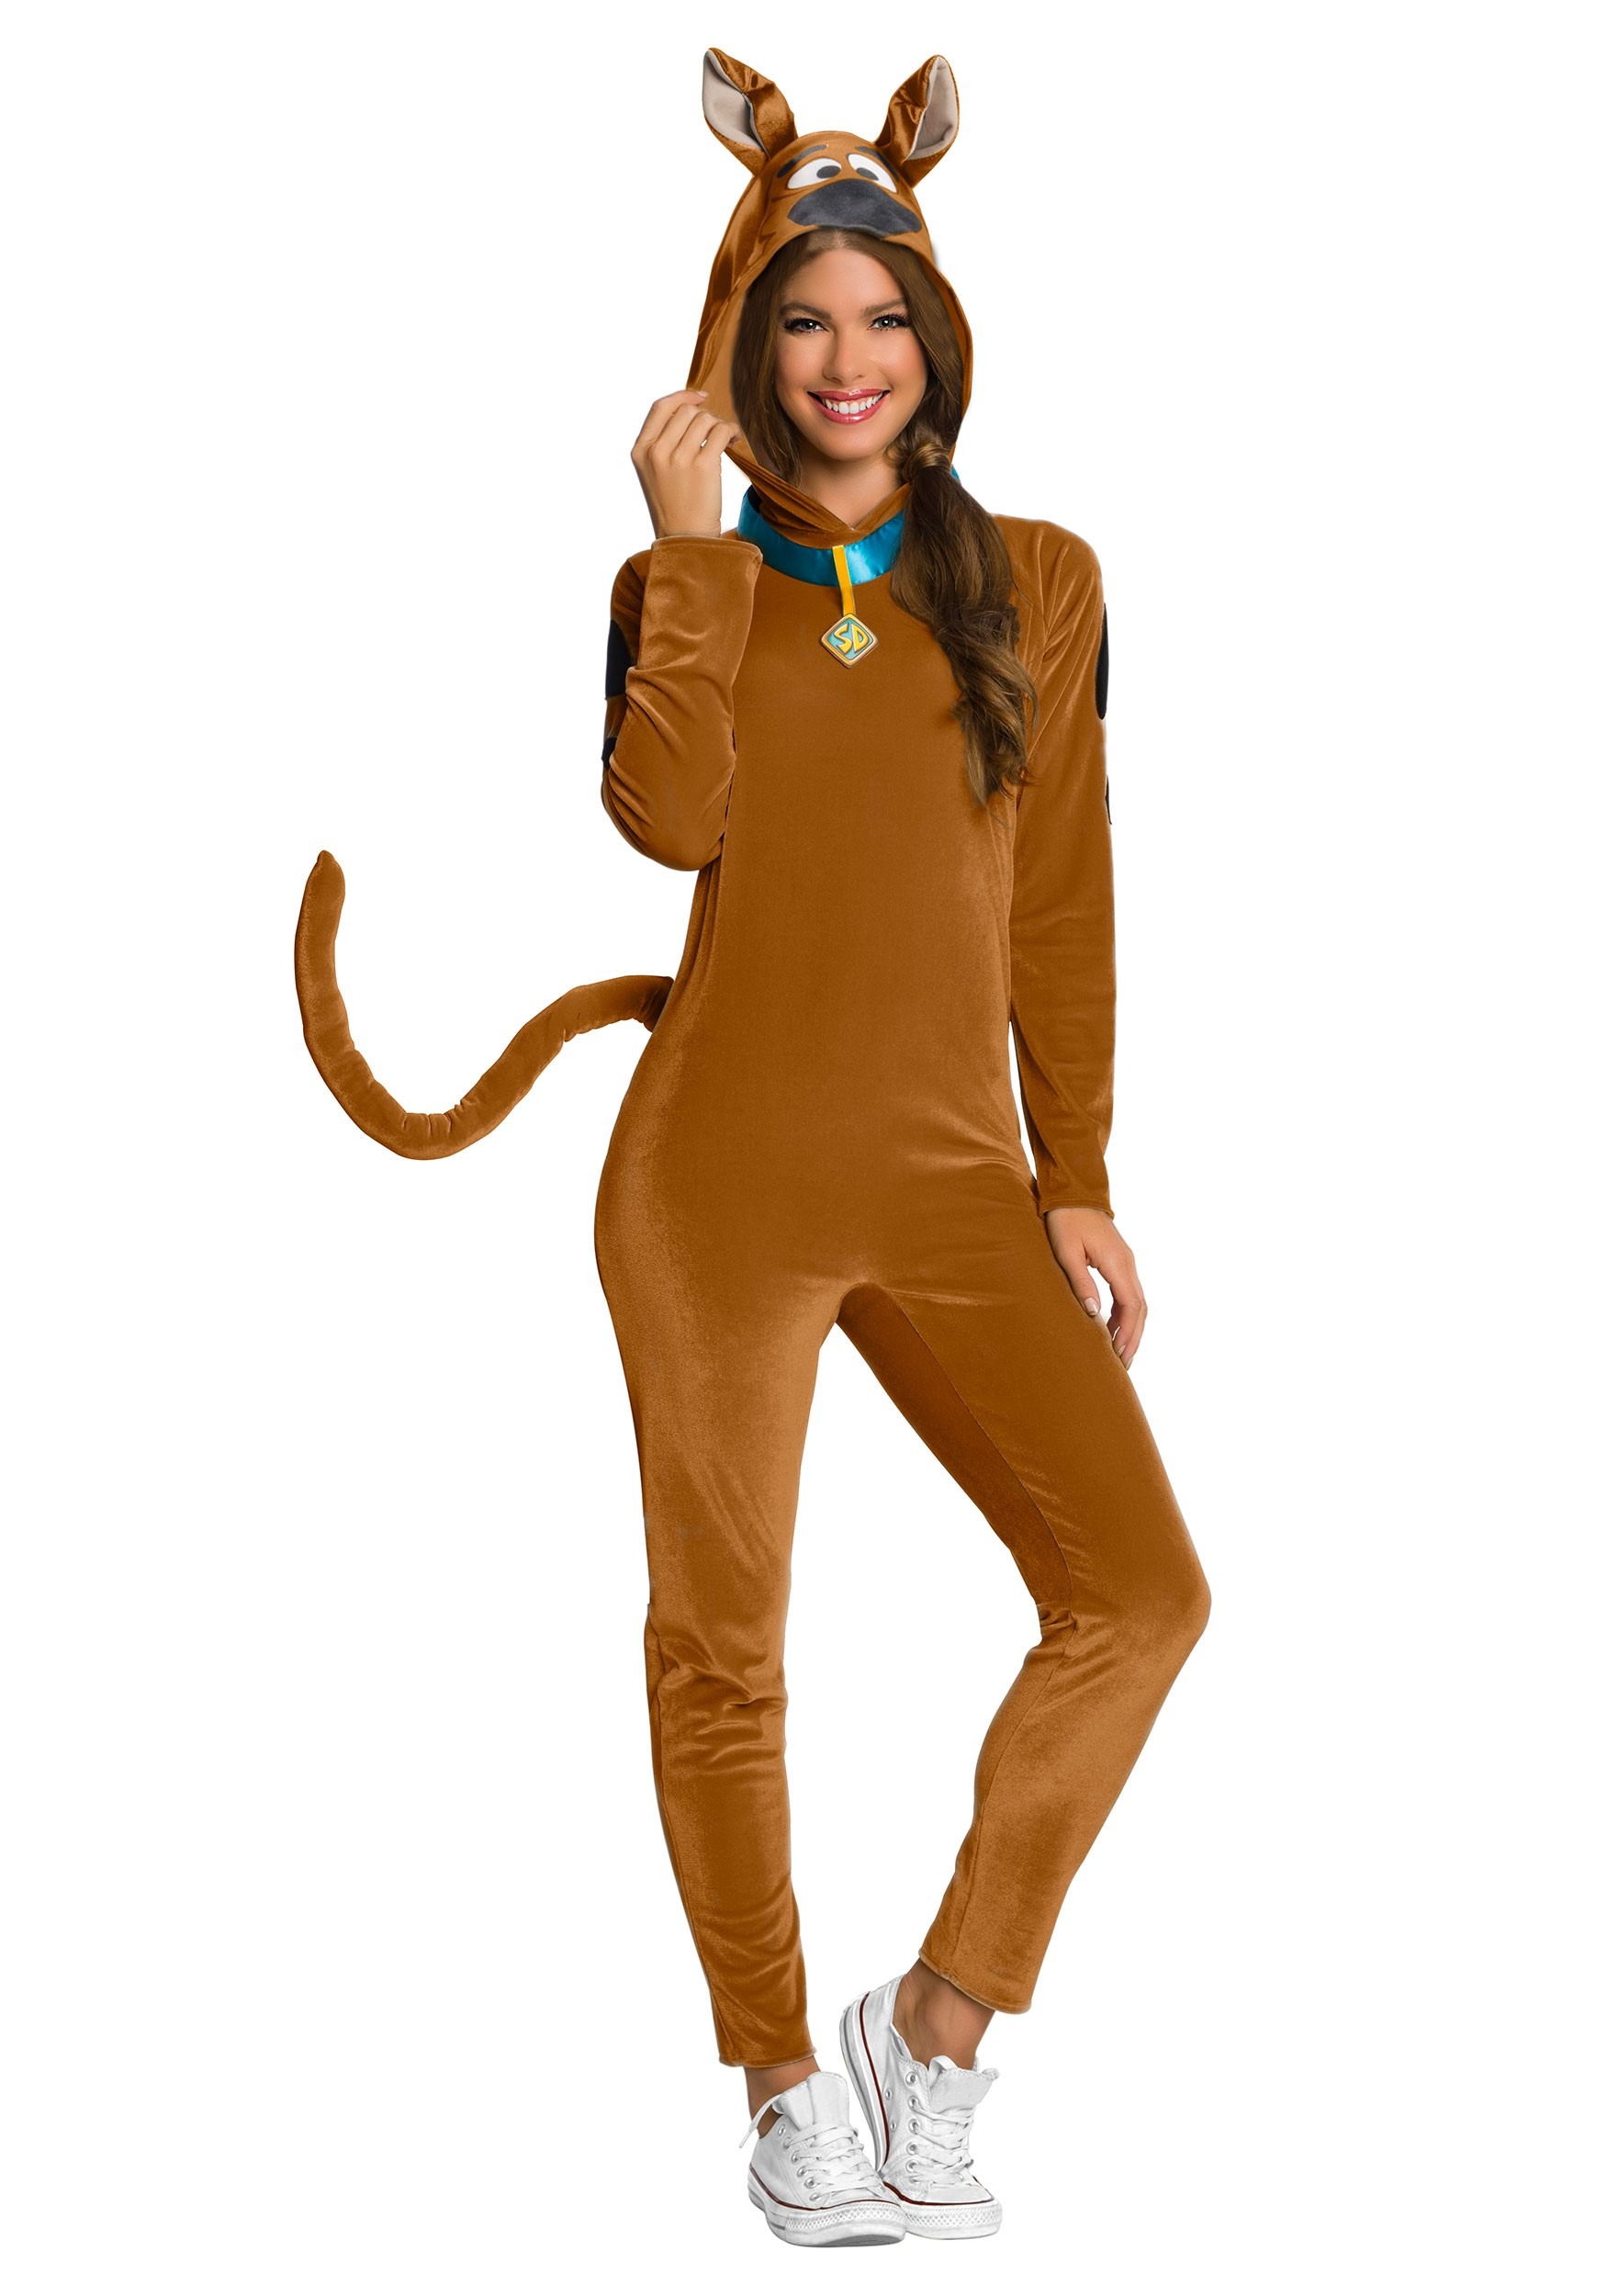 Scooby-Doo Women's Costume W/ Collar And Tail